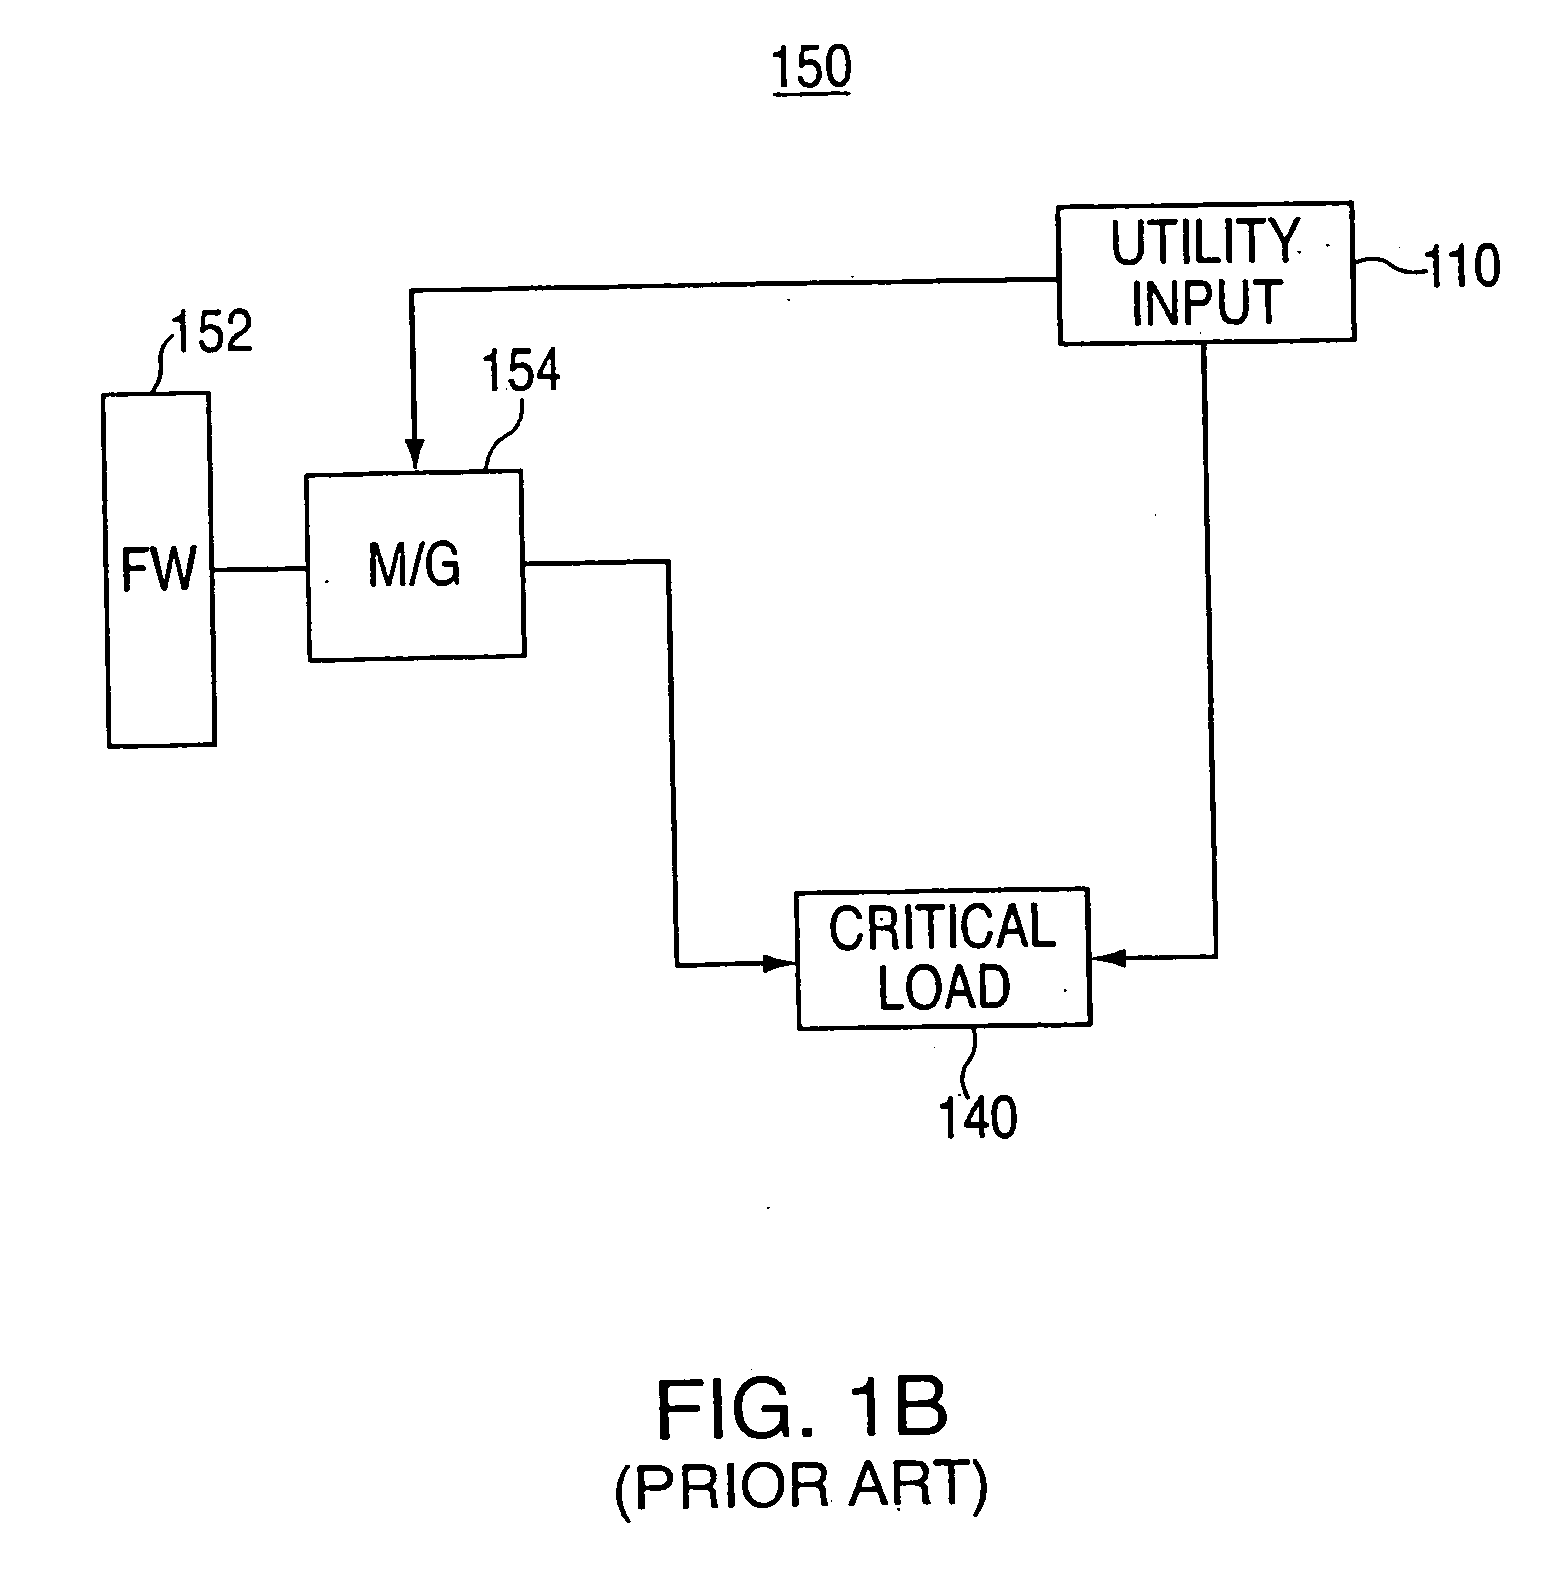 Systems and methods for providing backup energy to a load